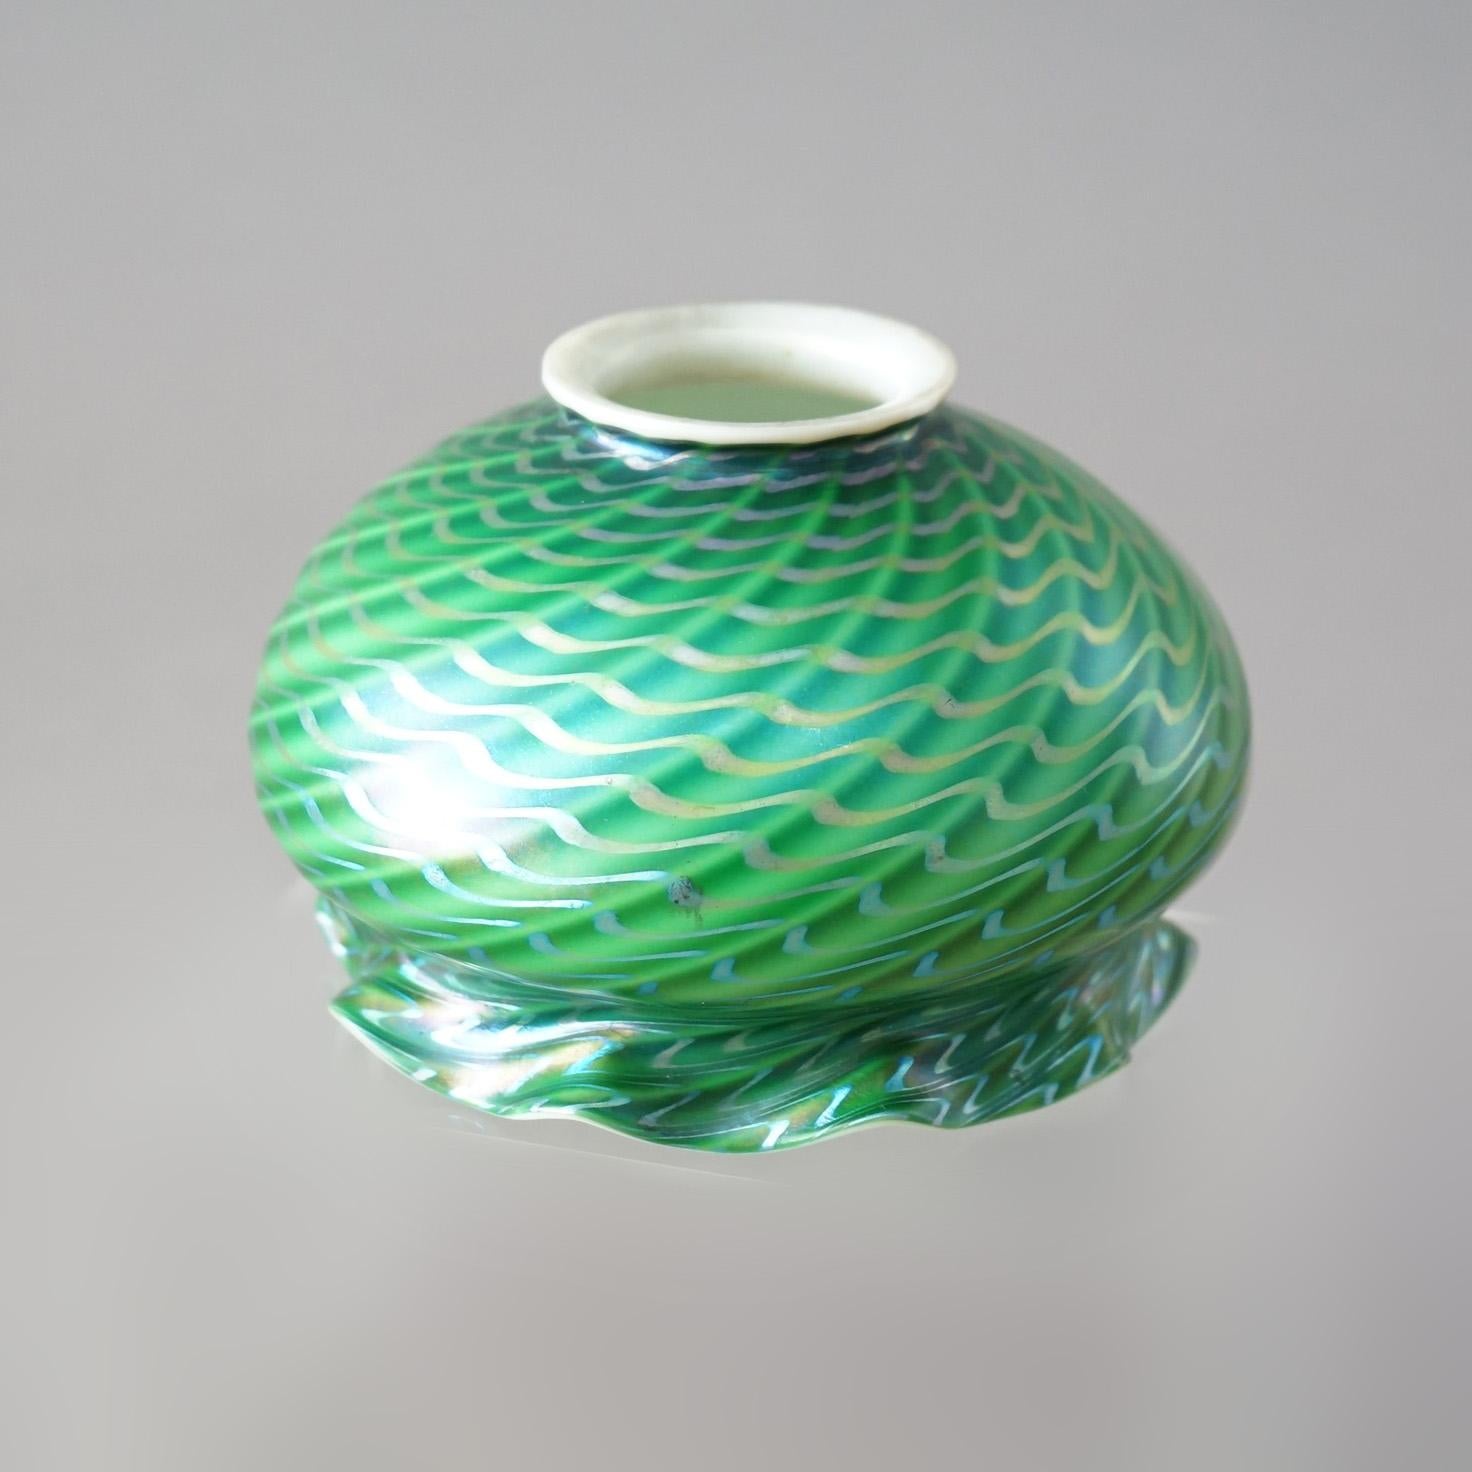 An antique lamp shade in the manner of Quezal offers emerald green swirl art glass construction with ruffled rim and gilt decoration, c1920

Measures - 3.75